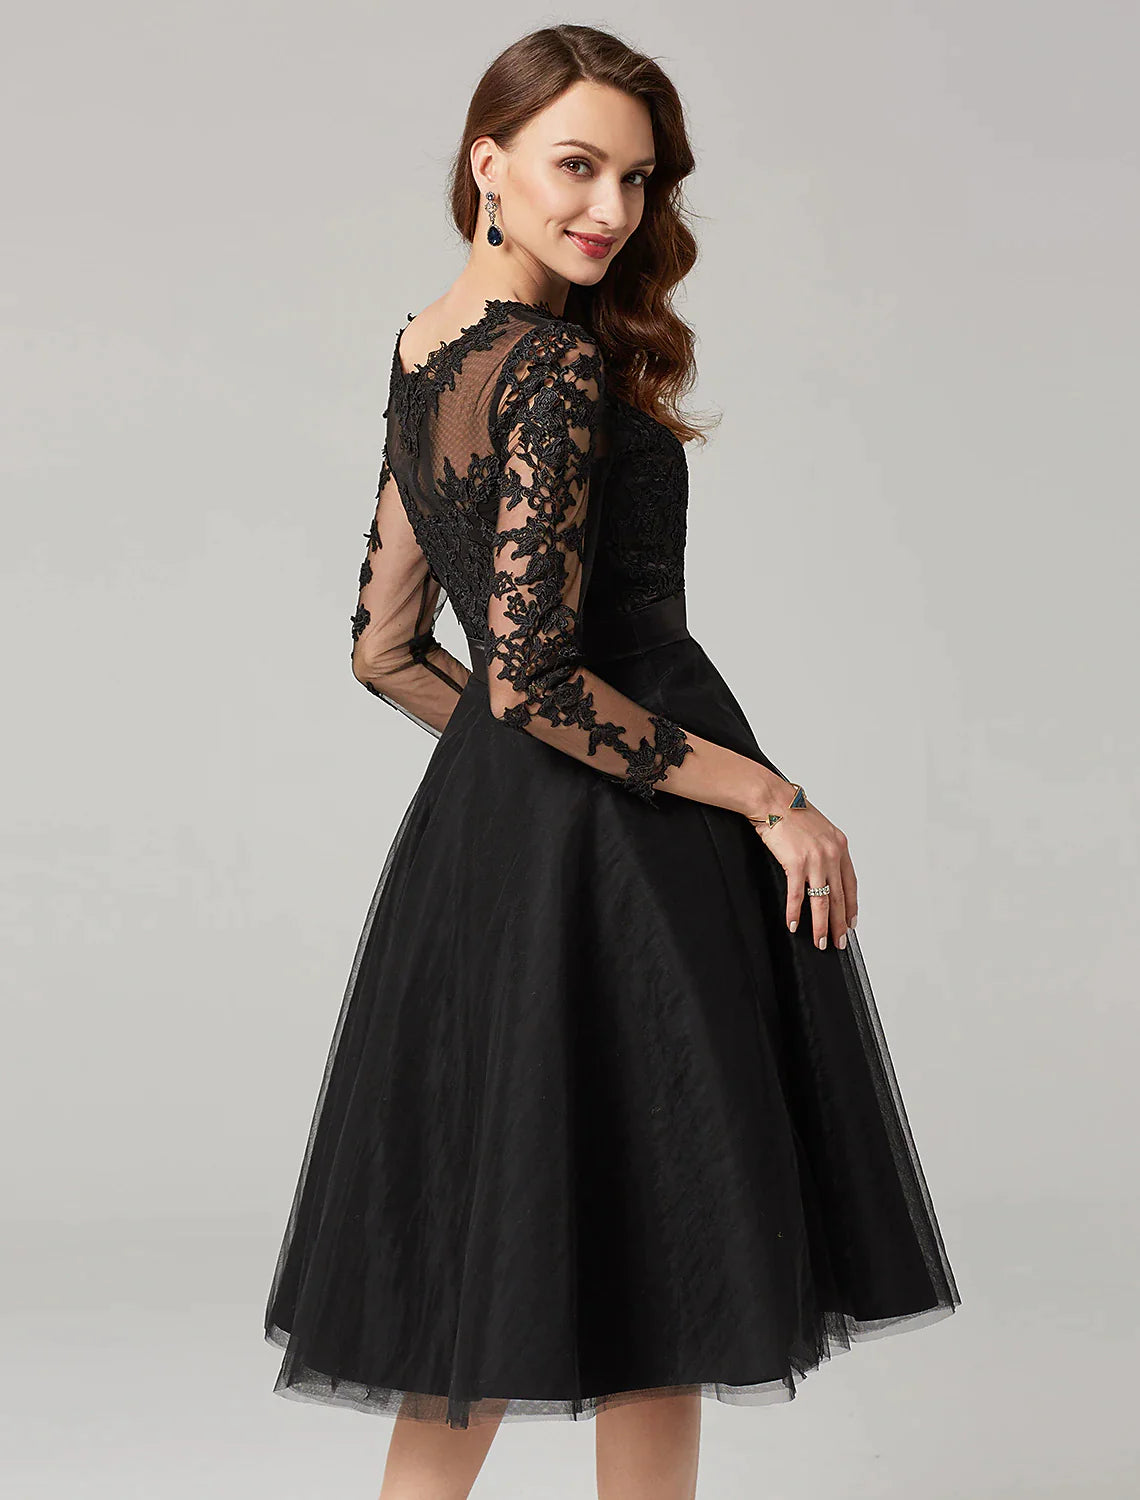 A-Line Elegant Dress Wedding Guest Knee Length 3/4 Length Sleeve Illusion Neck Tulle Over Lace with Appliques